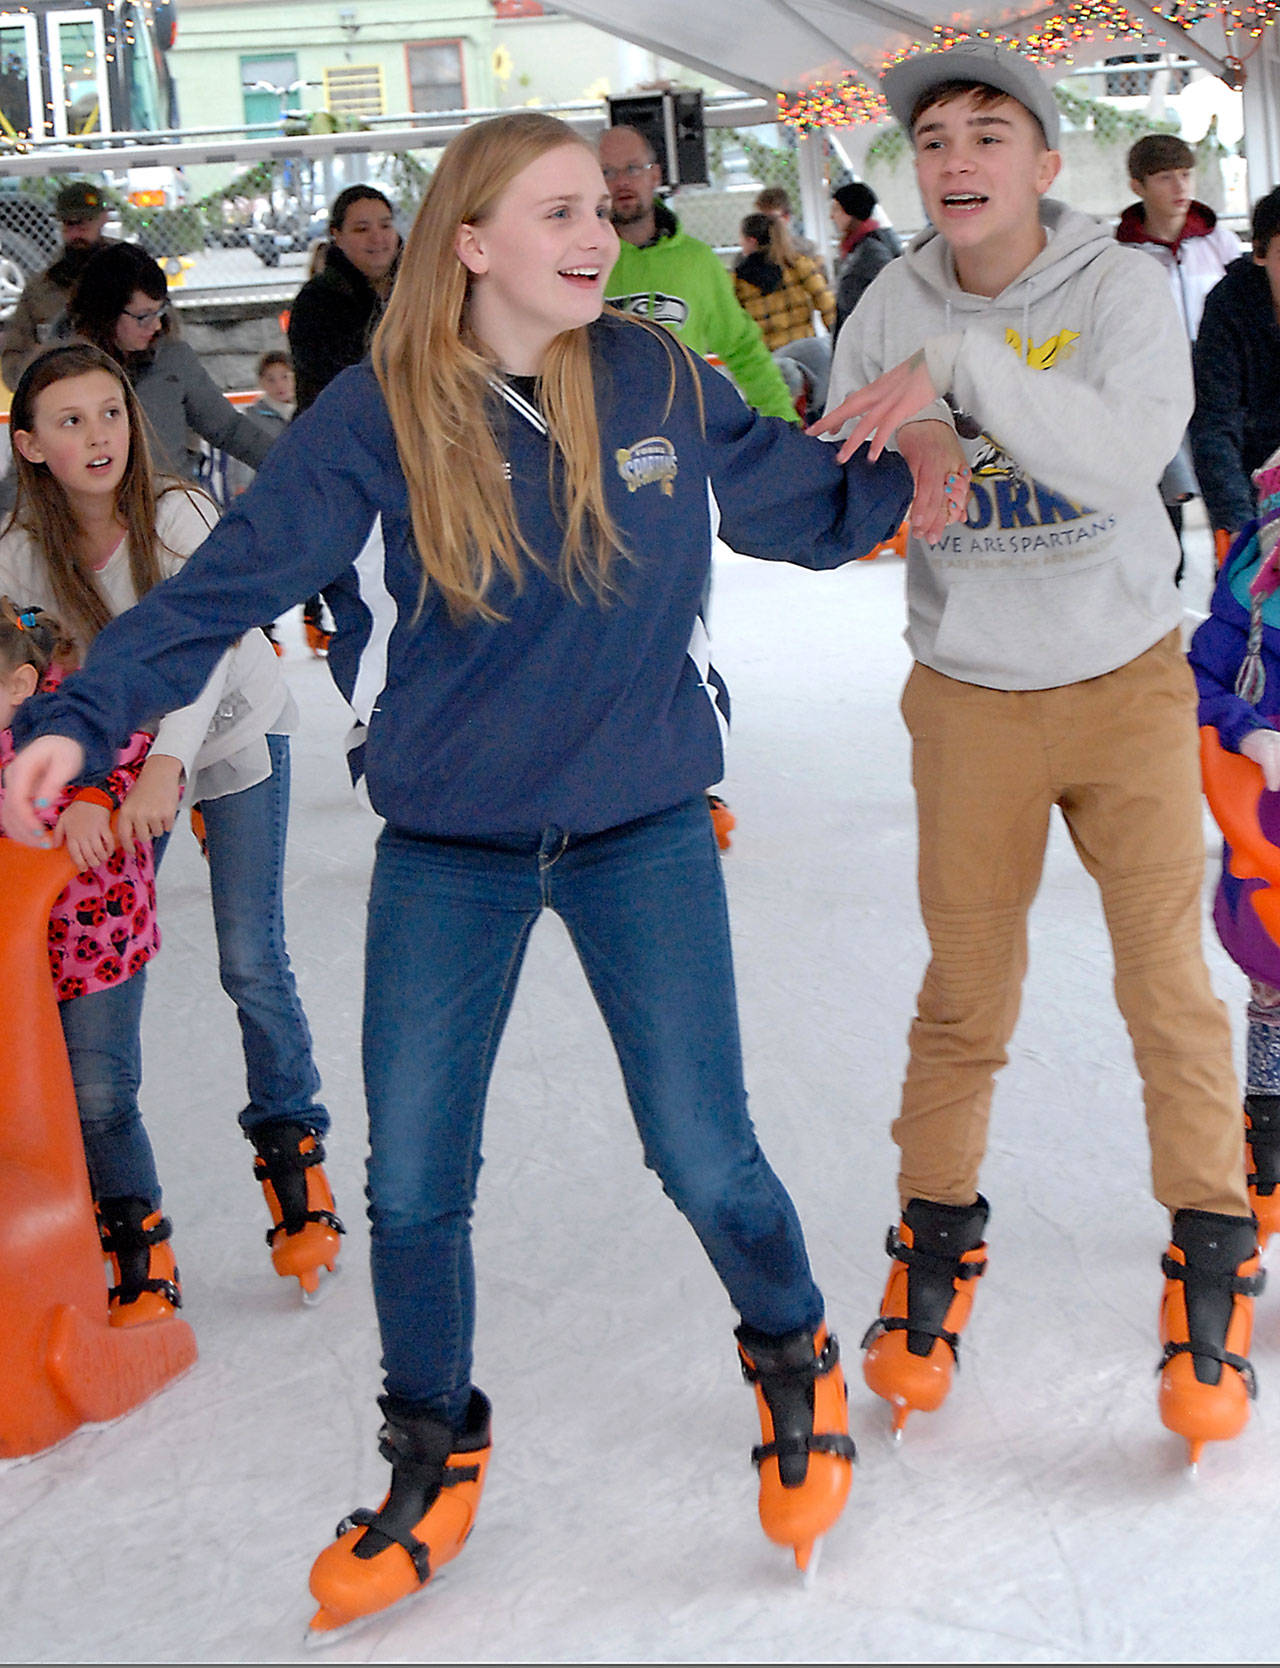 &lt;strong&gt;Keith Thorpe&lt;/strong&gt;/Peninsula Daily News                                 Kadie Wood, left, and Grady Earls, both 13 of Forks, enjoy an afternoon skating Saturday at the Port Angeles Winter Ice Village in downtown Port Angeles.